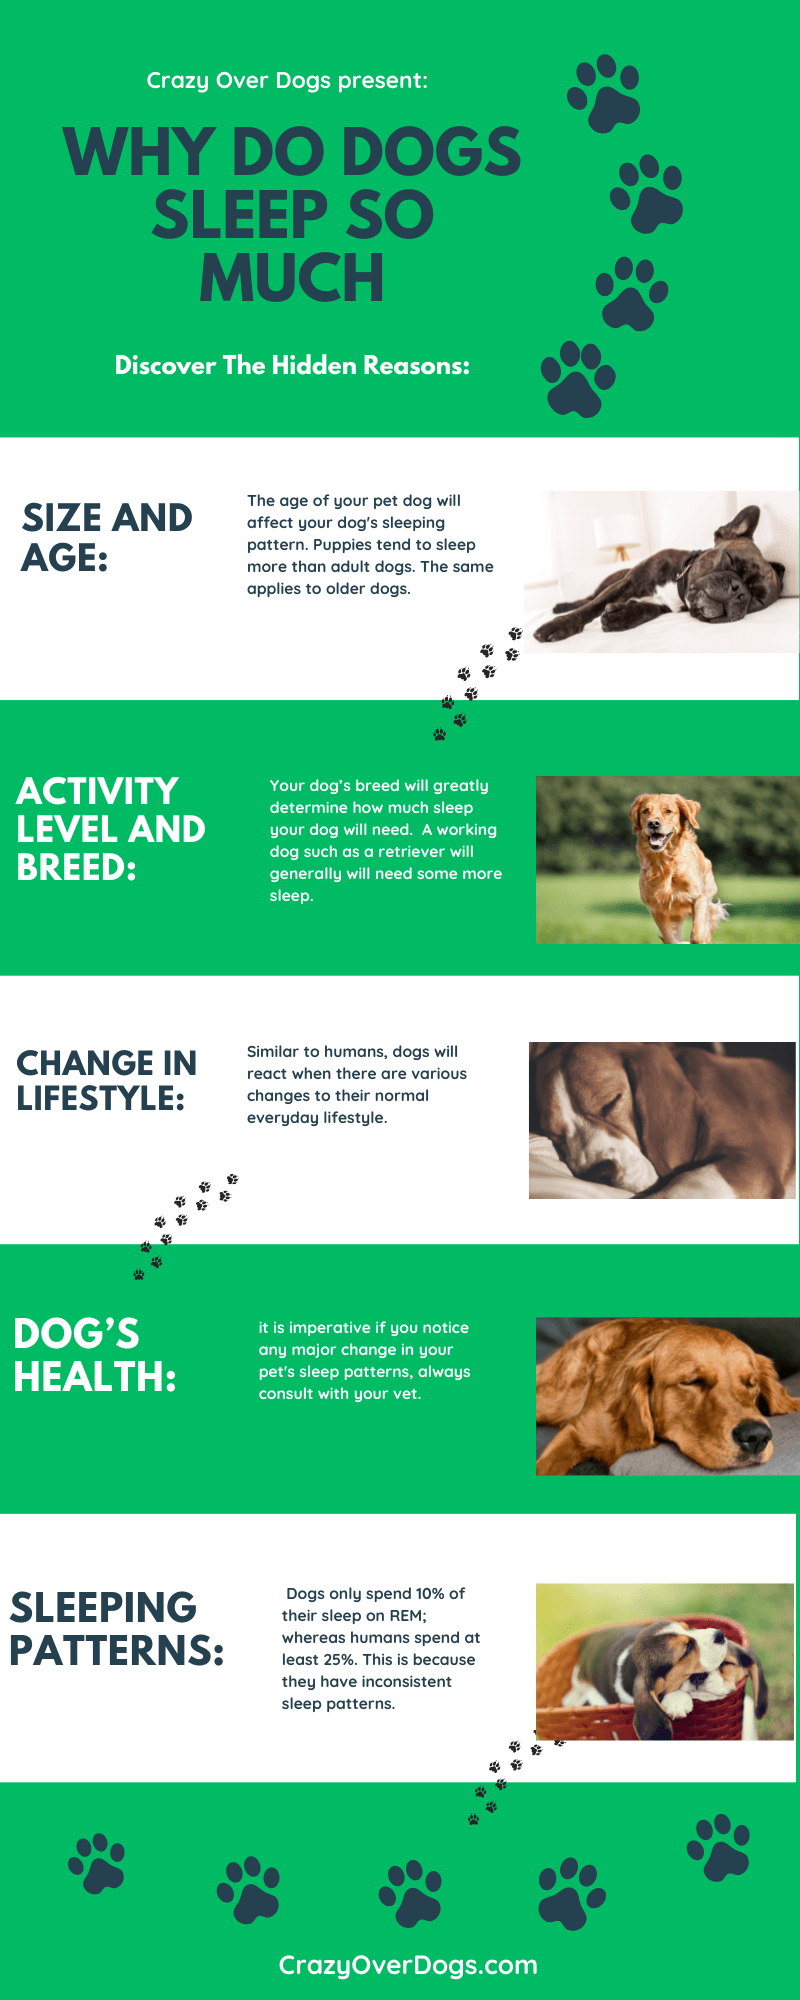 Why Do Dogs Sleep So Much Infographic